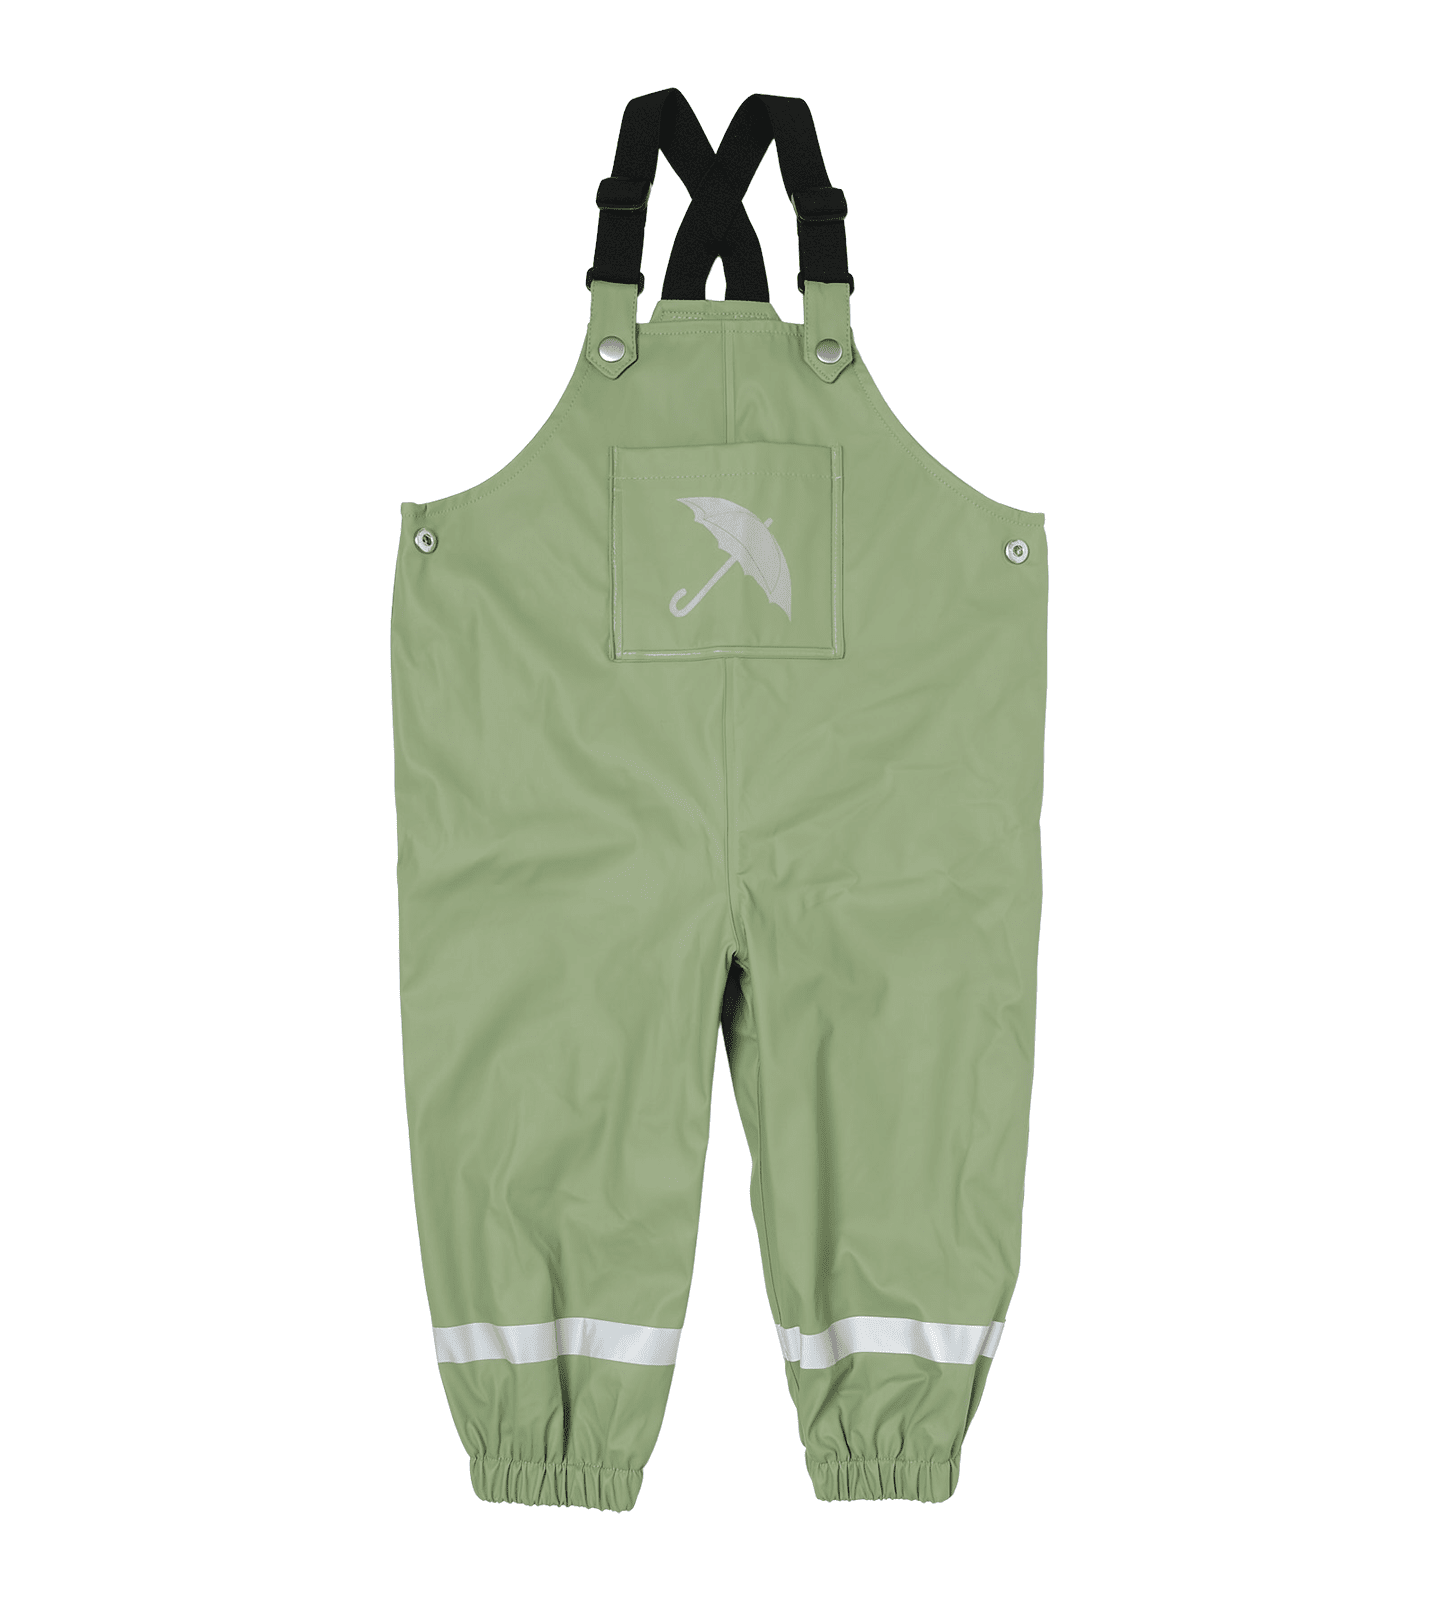 Waterproof Overalls - Brolly Sheets AU sage